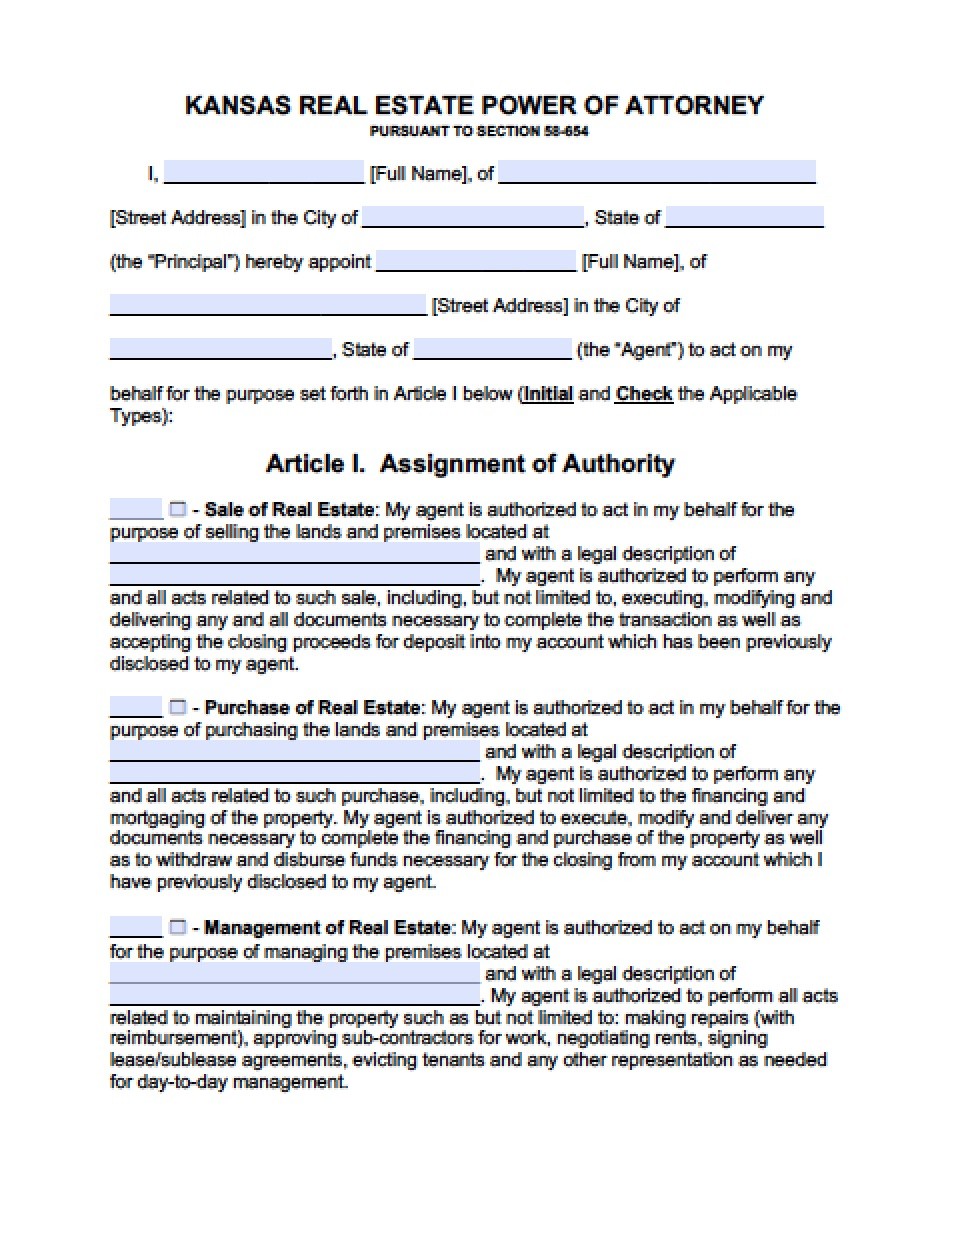 Kansas Real Estate ONLY Power Of Attorney Form Document Medical